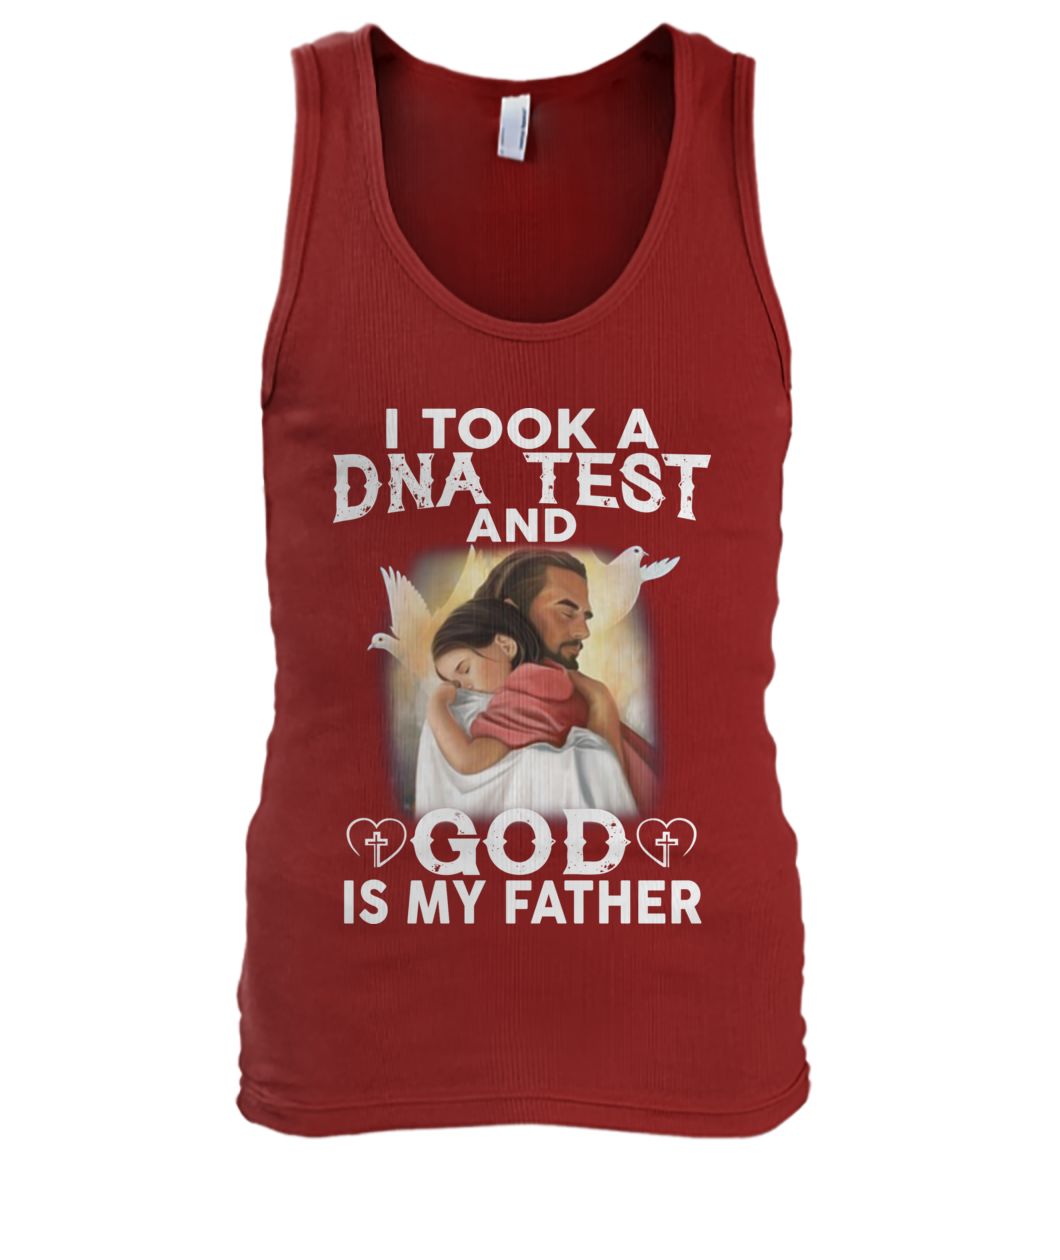 I took a dna test and god is my father men's tank top